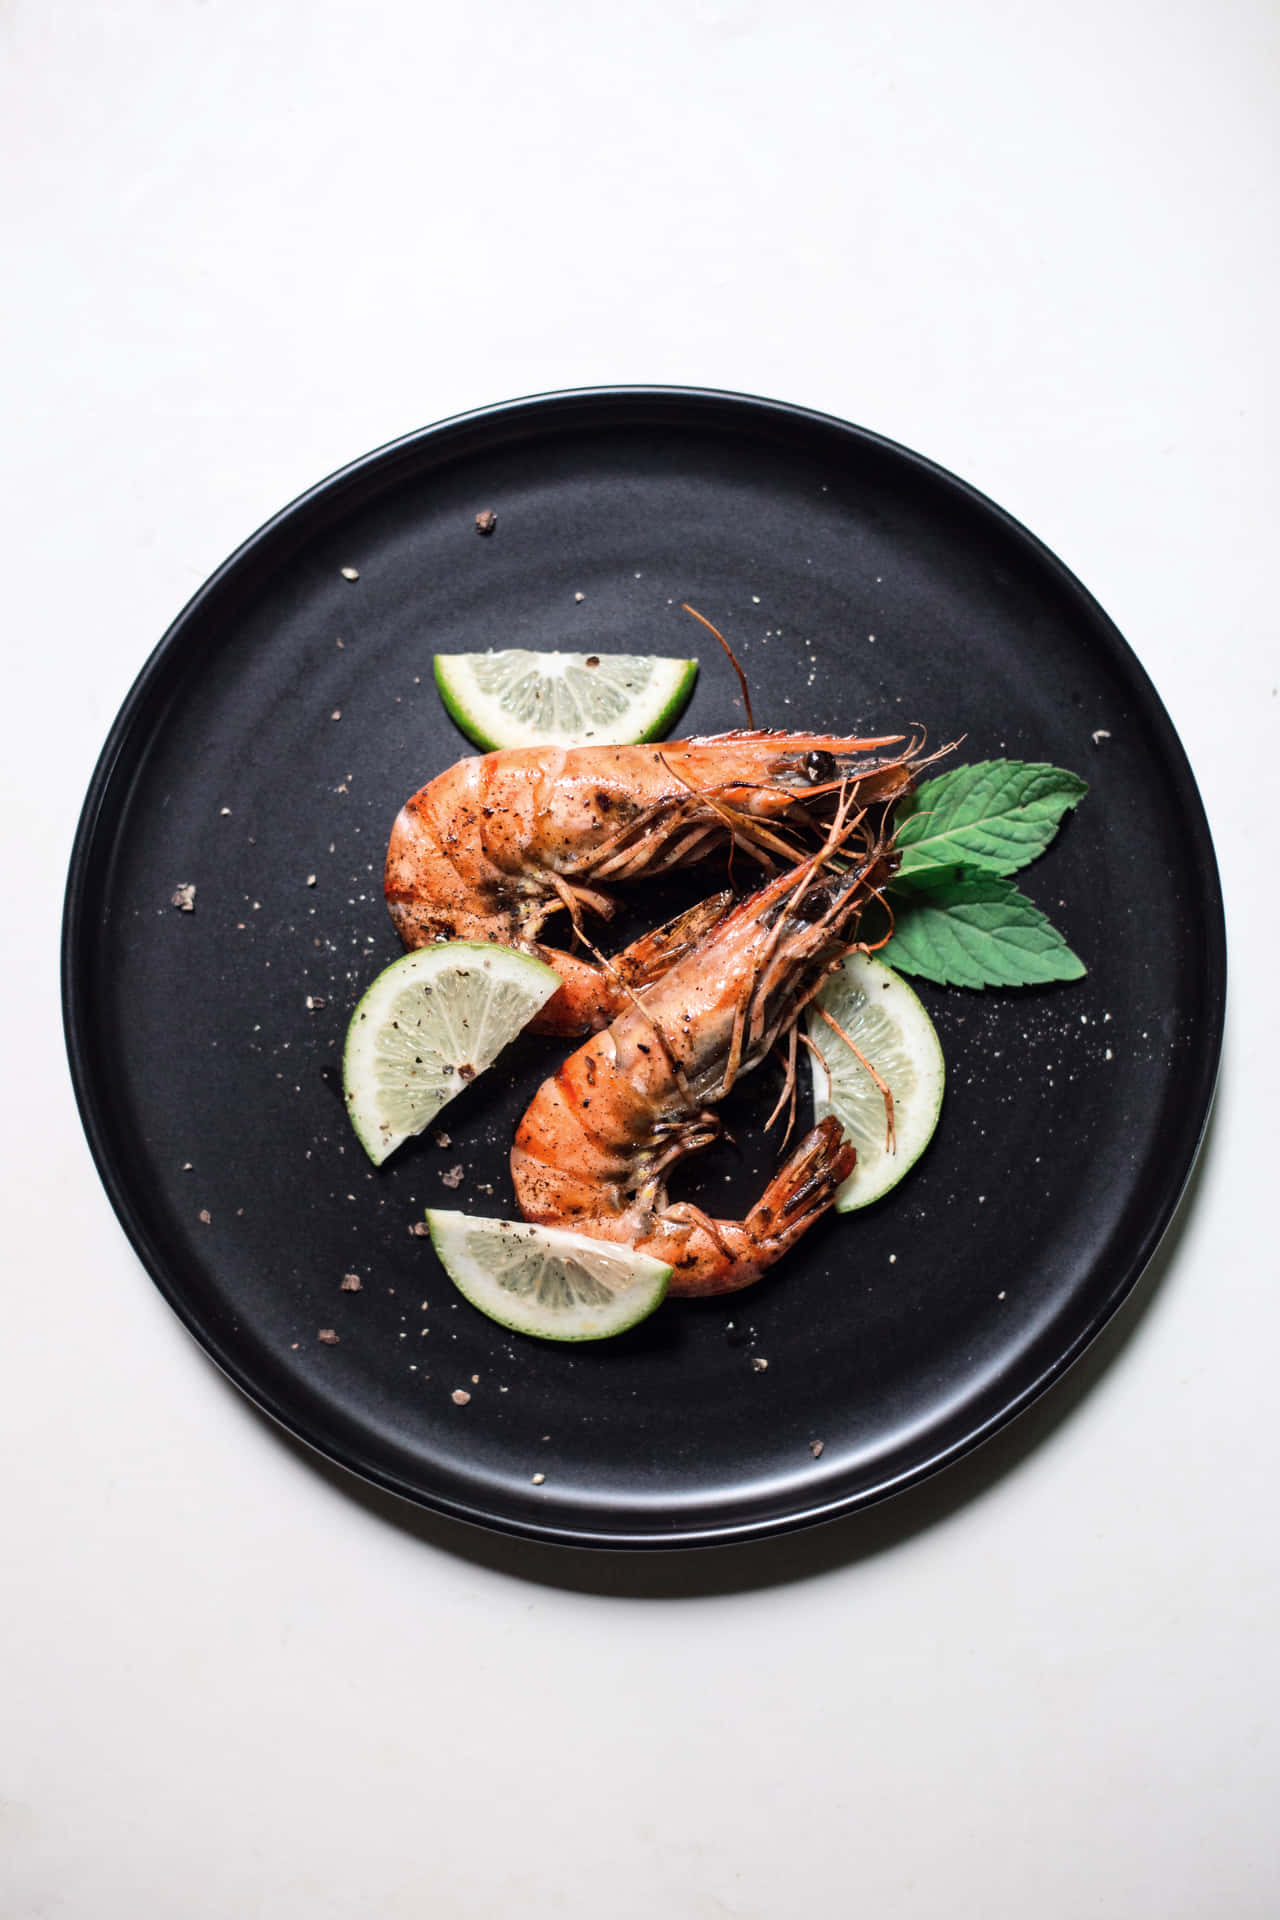 Prawns On A Black Plate With Lime Slices